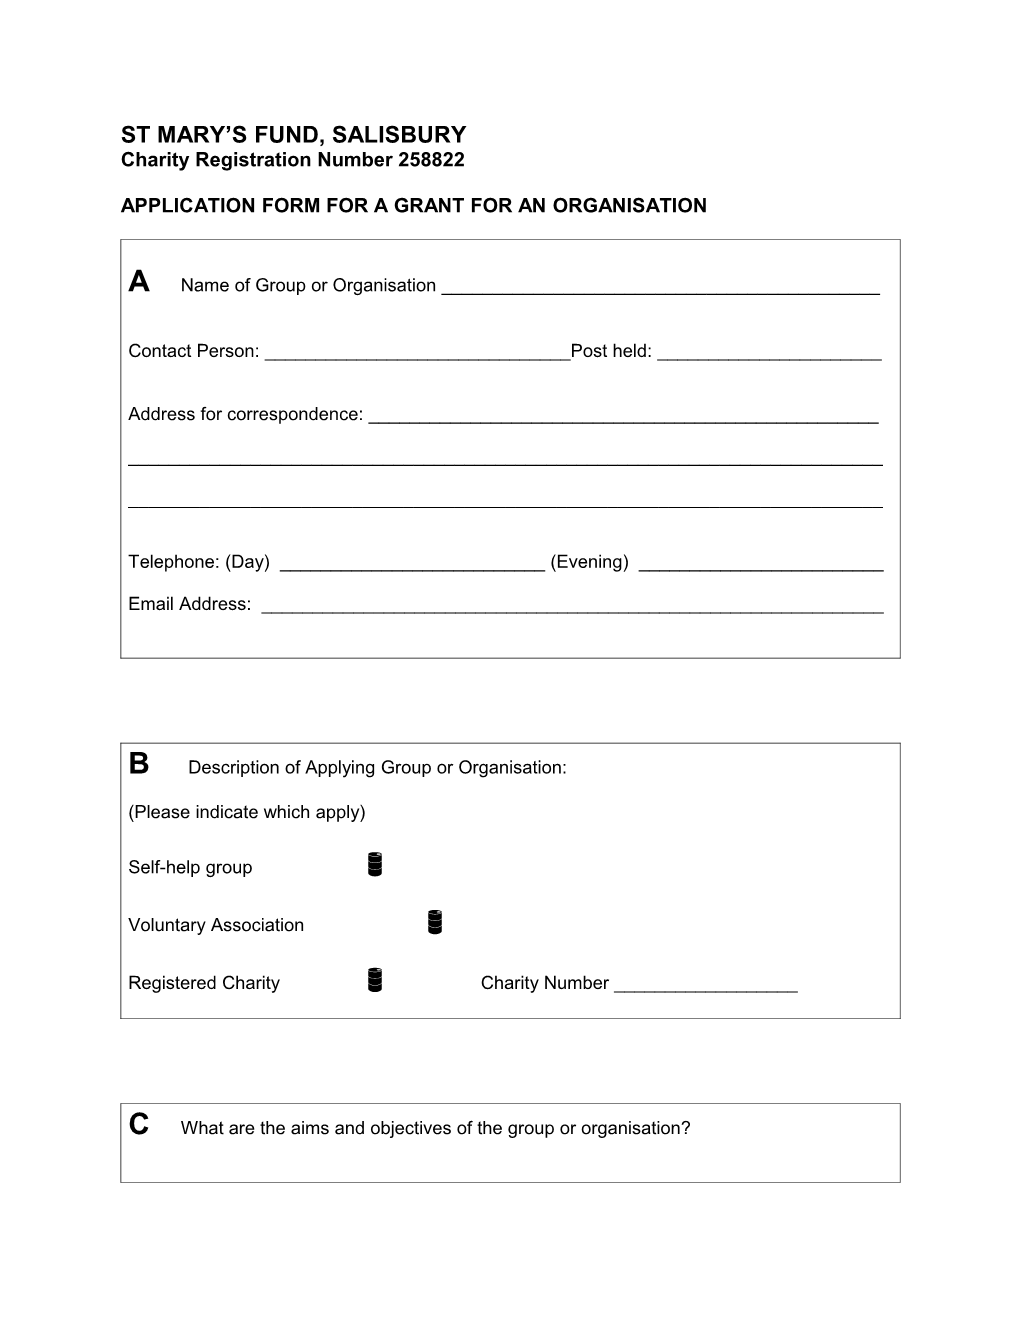 Application Form for a Grant for an Organisation